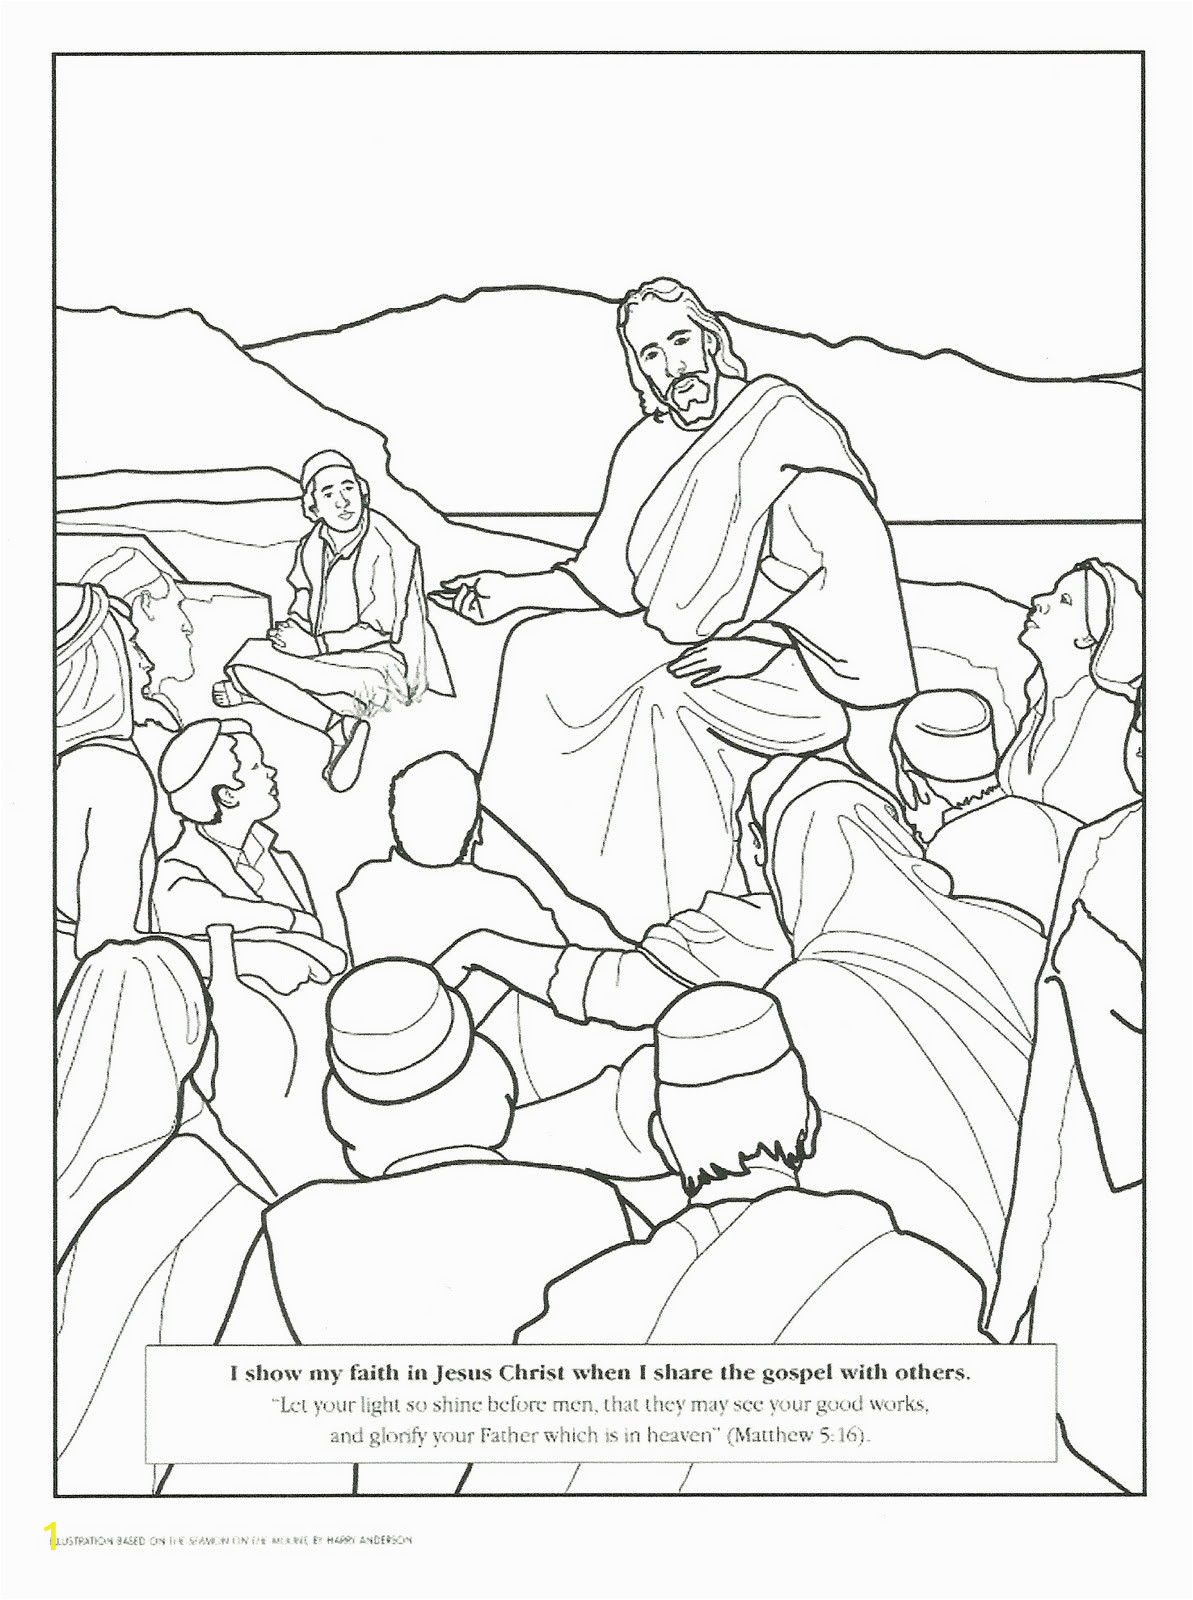 Jesus Teaching In the Synagogue Coloring Page Jesus Teaching In the Synagogue Coloring Page Coloring Pages